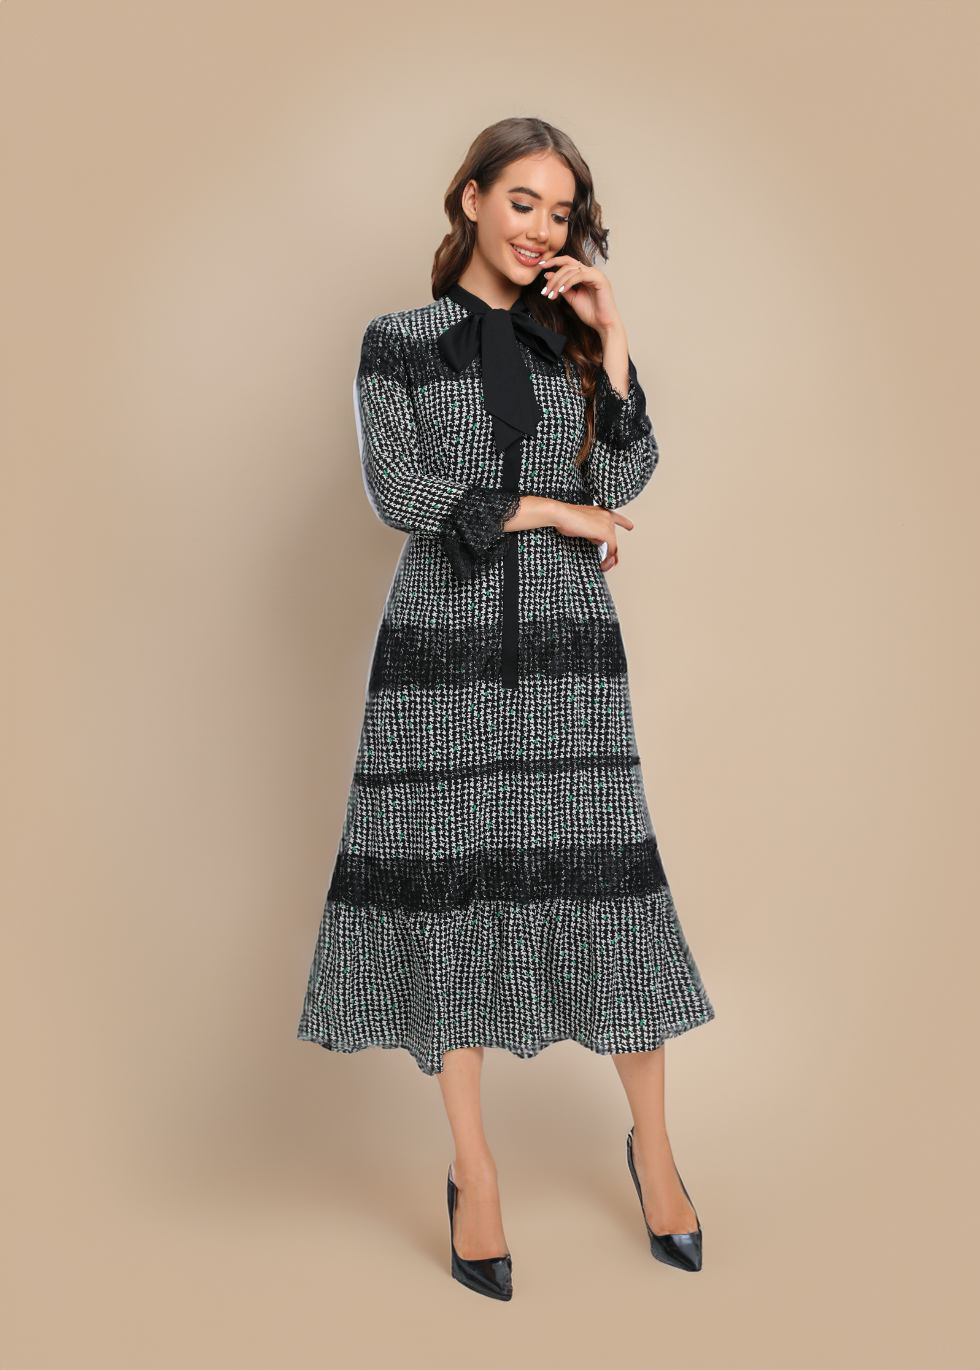 Classic Tweed Shift Dress with Bow Collar Detail